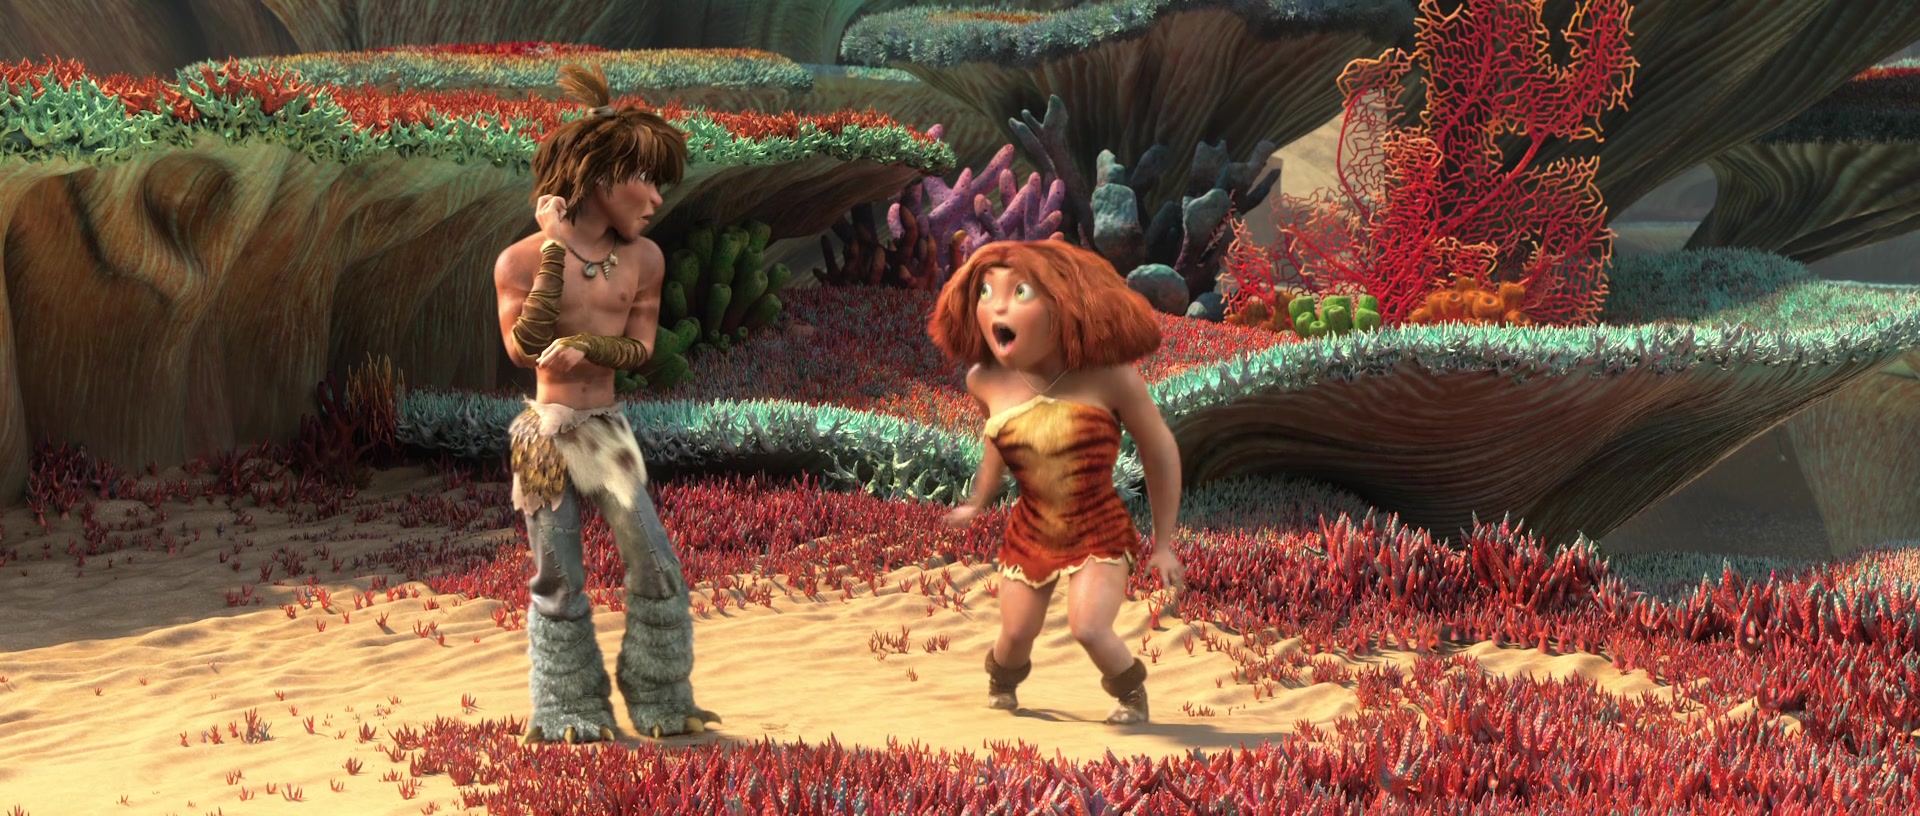 Tweet. a. The Croods Images. 